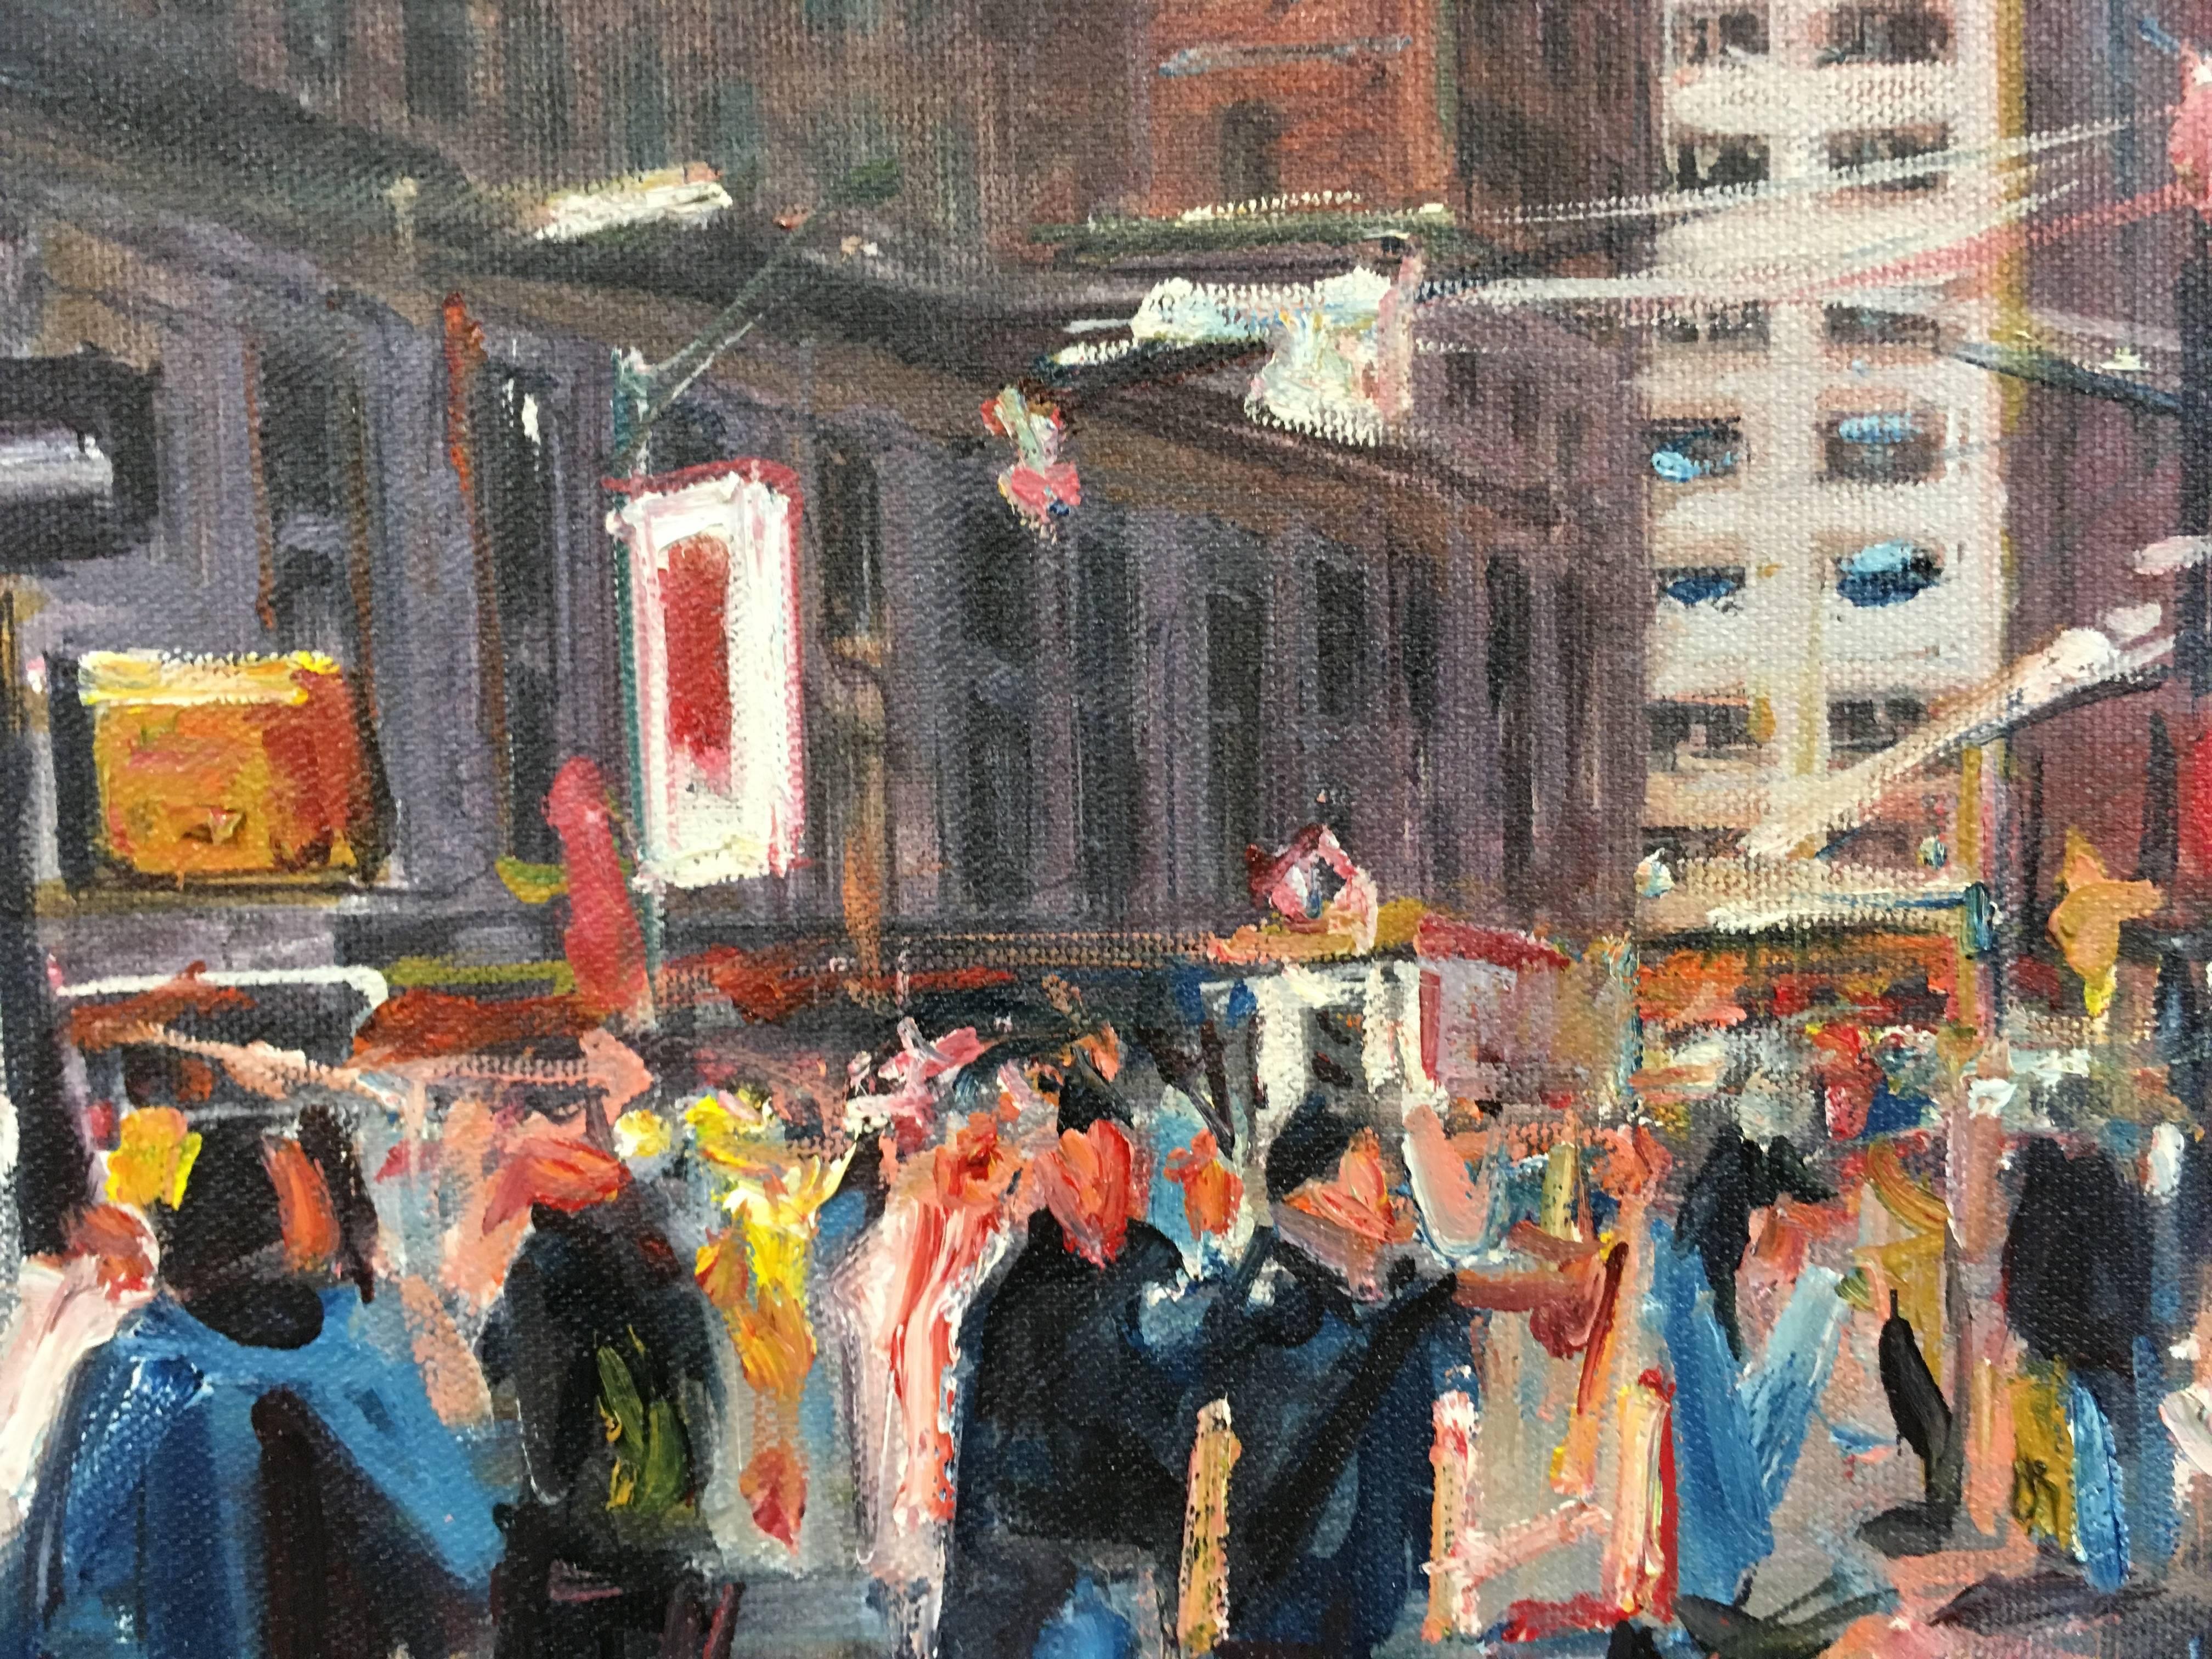 New York III - Painting by Ernesto Torres